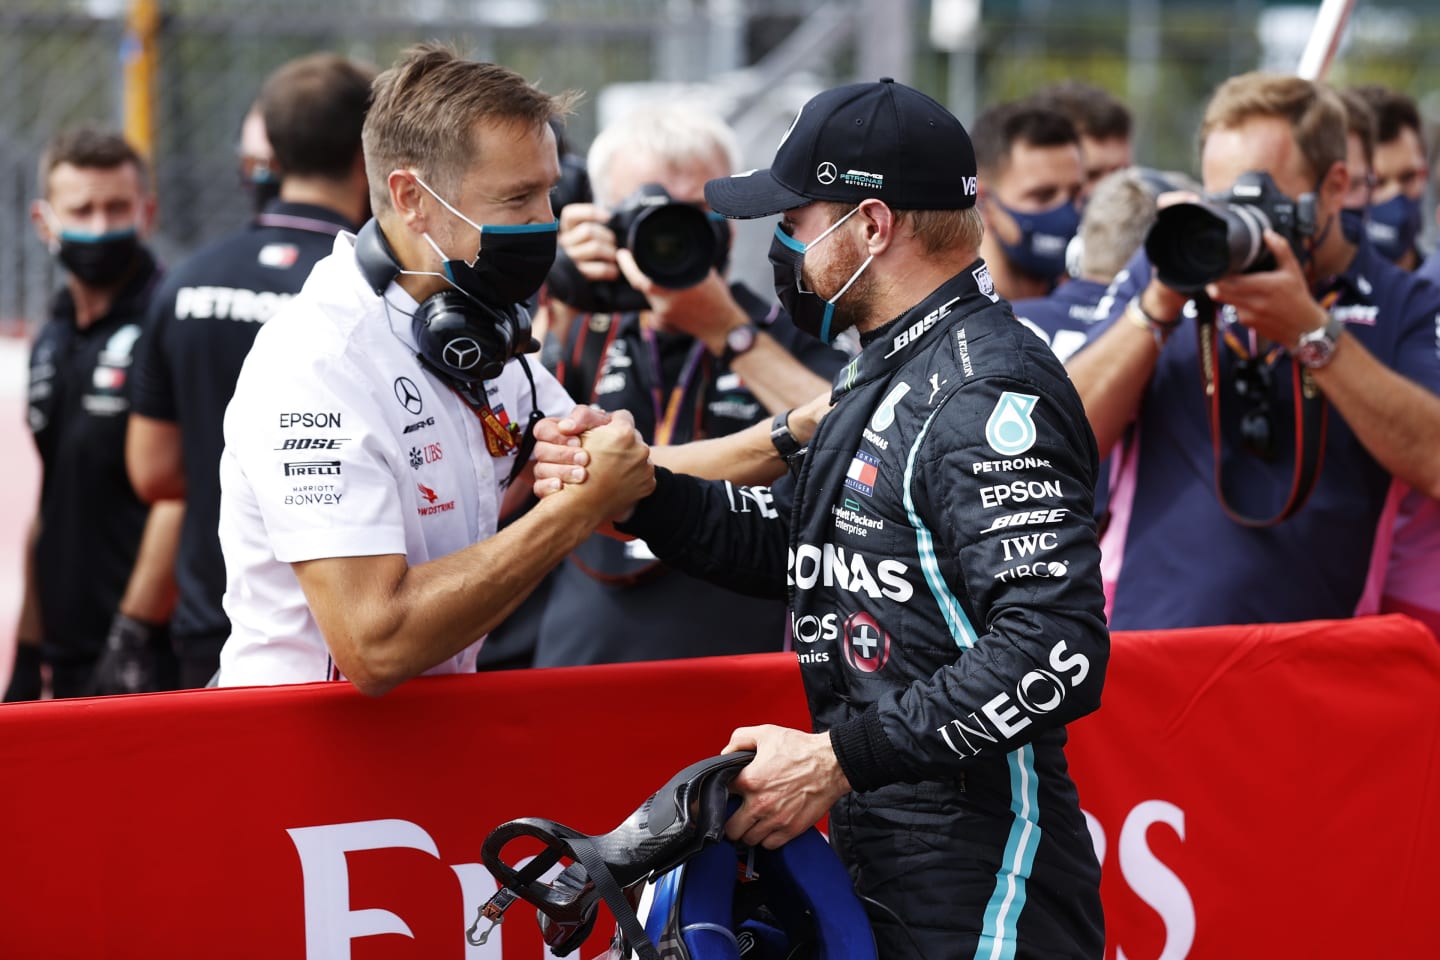 NORTHAMPTON, ENGLAND - AUGUST 08: Pole position qualifier Valtteri Bottas of Finland and Mercedes GP celebrates with a team member in parc ferme during qualifying for the F1 70th Anniversary Grand Prix at Silverstone on August 08, 2020 in Northampton, England. (Photo by Andrew Boyers/Pool via Getty Images)